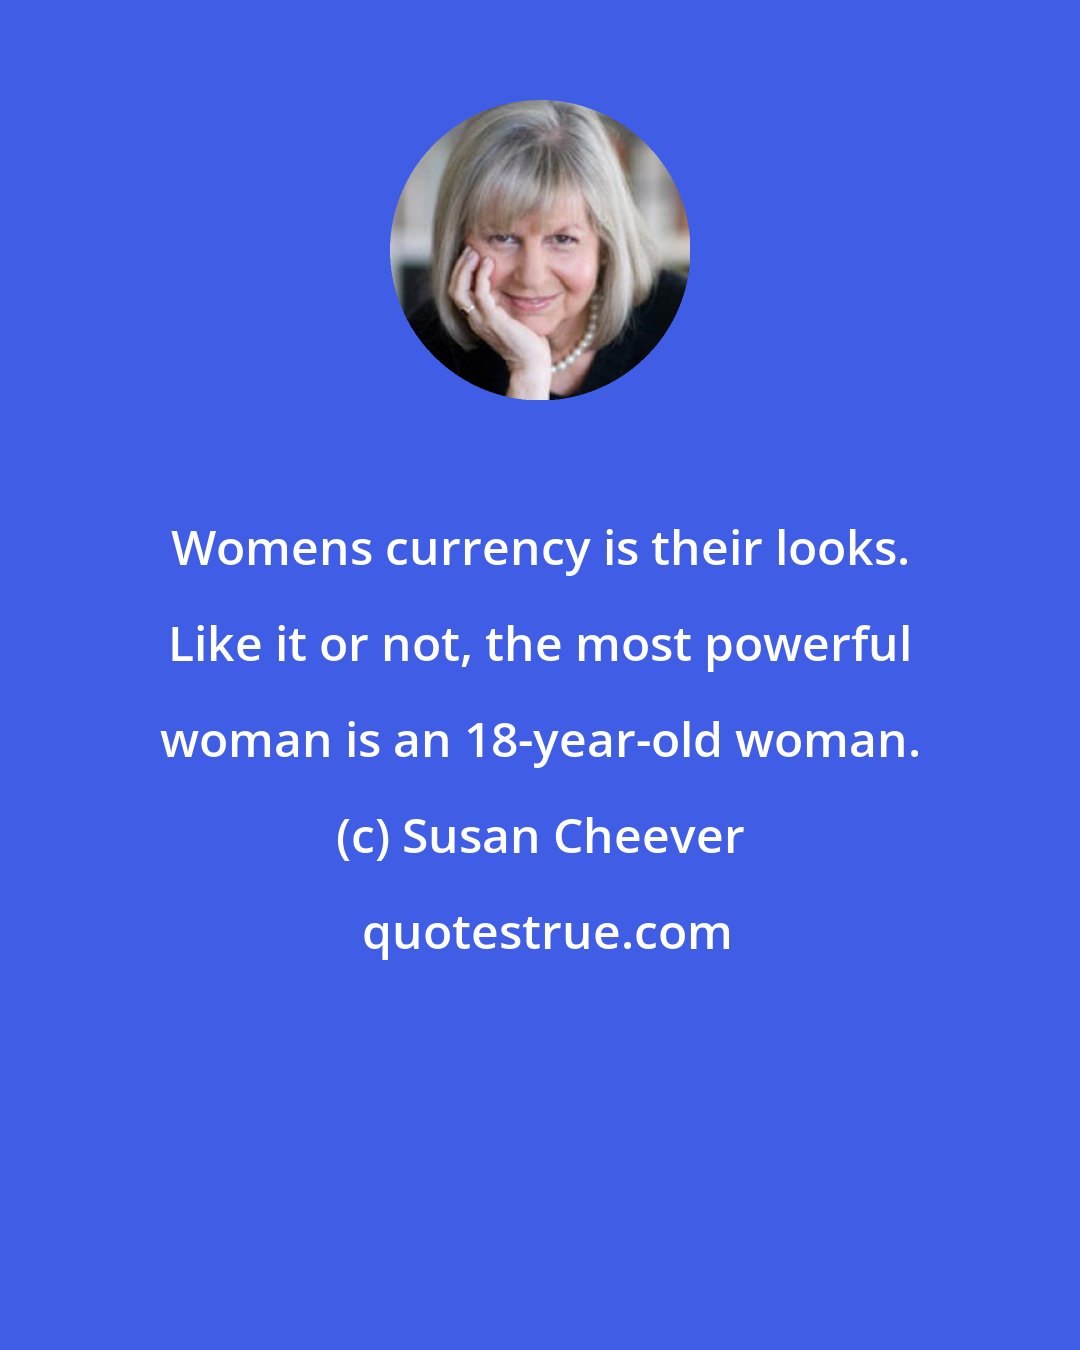 Susan Cheever: Womens currency is their looks. Like it or not, the most powerful woman is an 18-year-old woman.